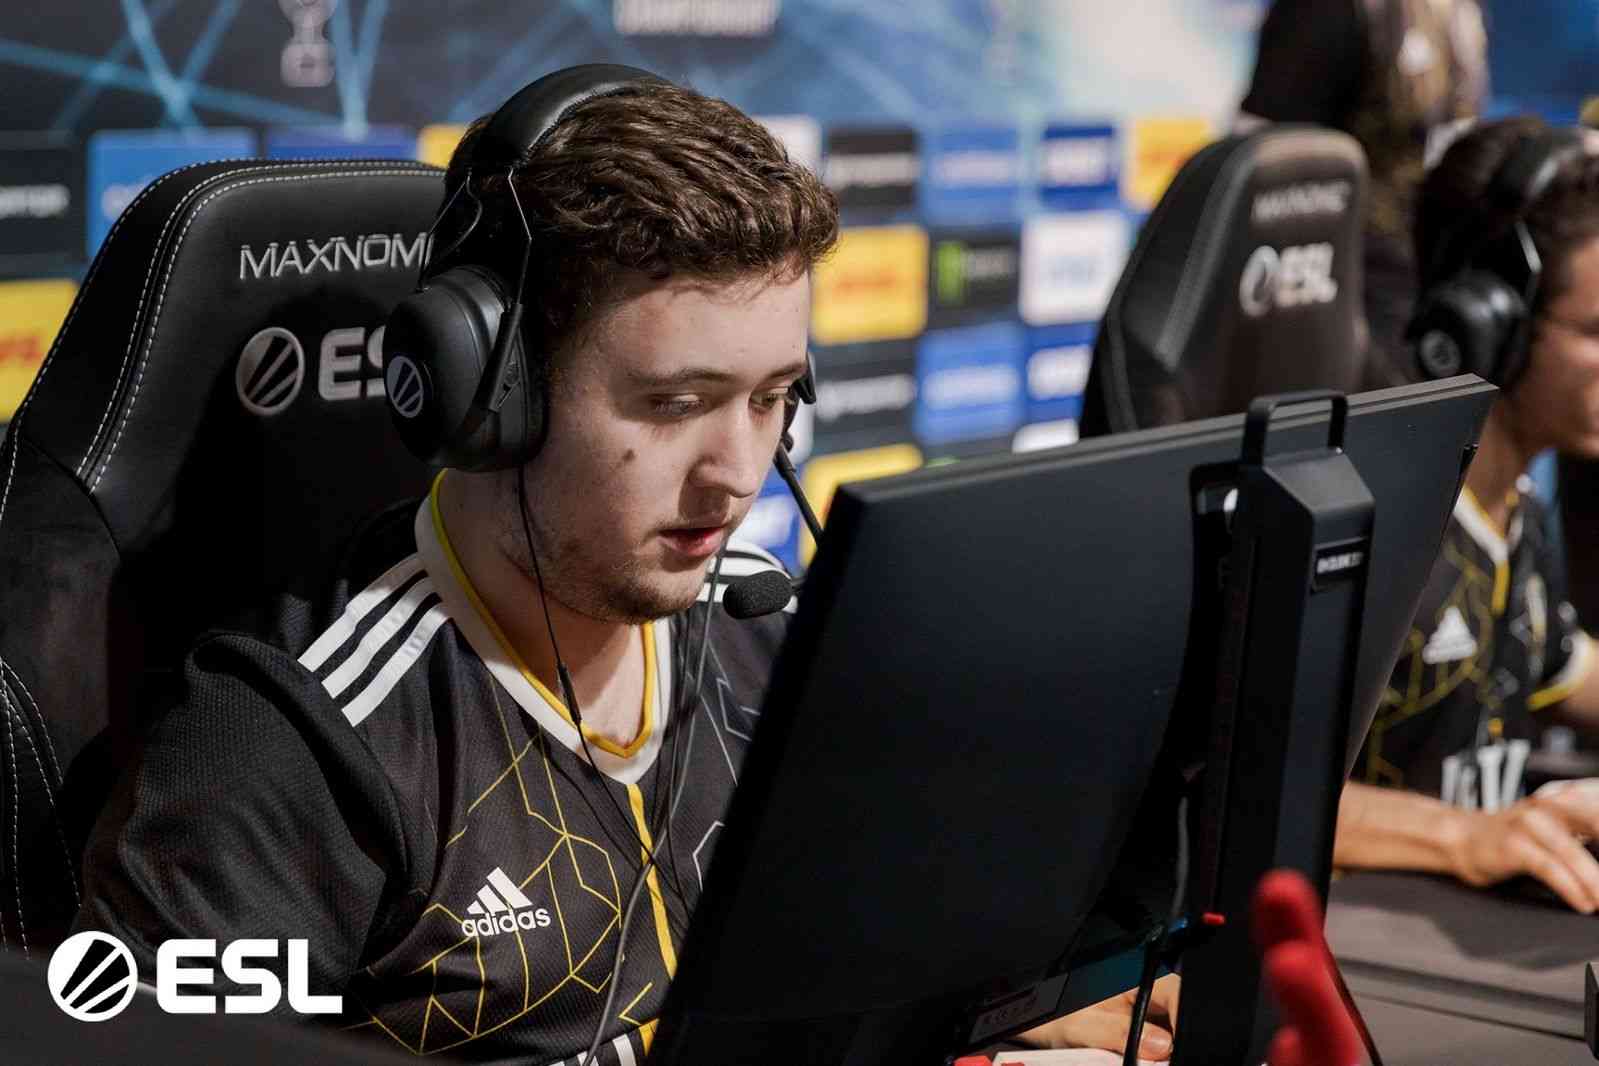 ZywOo has been considered one of the best CS:GO players since his breakout in 2018